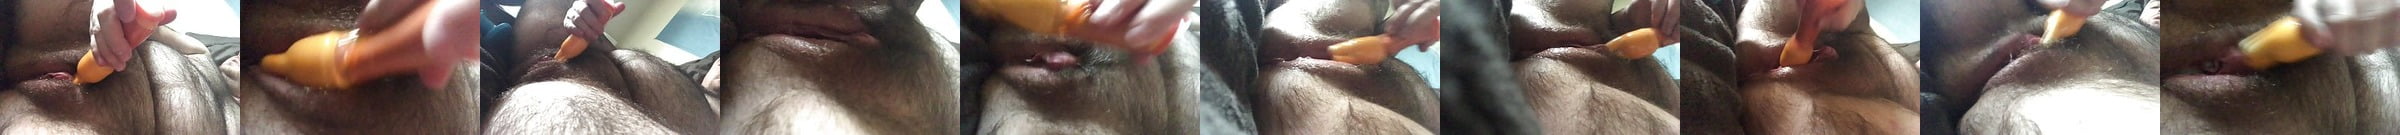 Ftm Solo Wet Pussy Gay Boy With Pussy HD Porn Video B4 XHamster